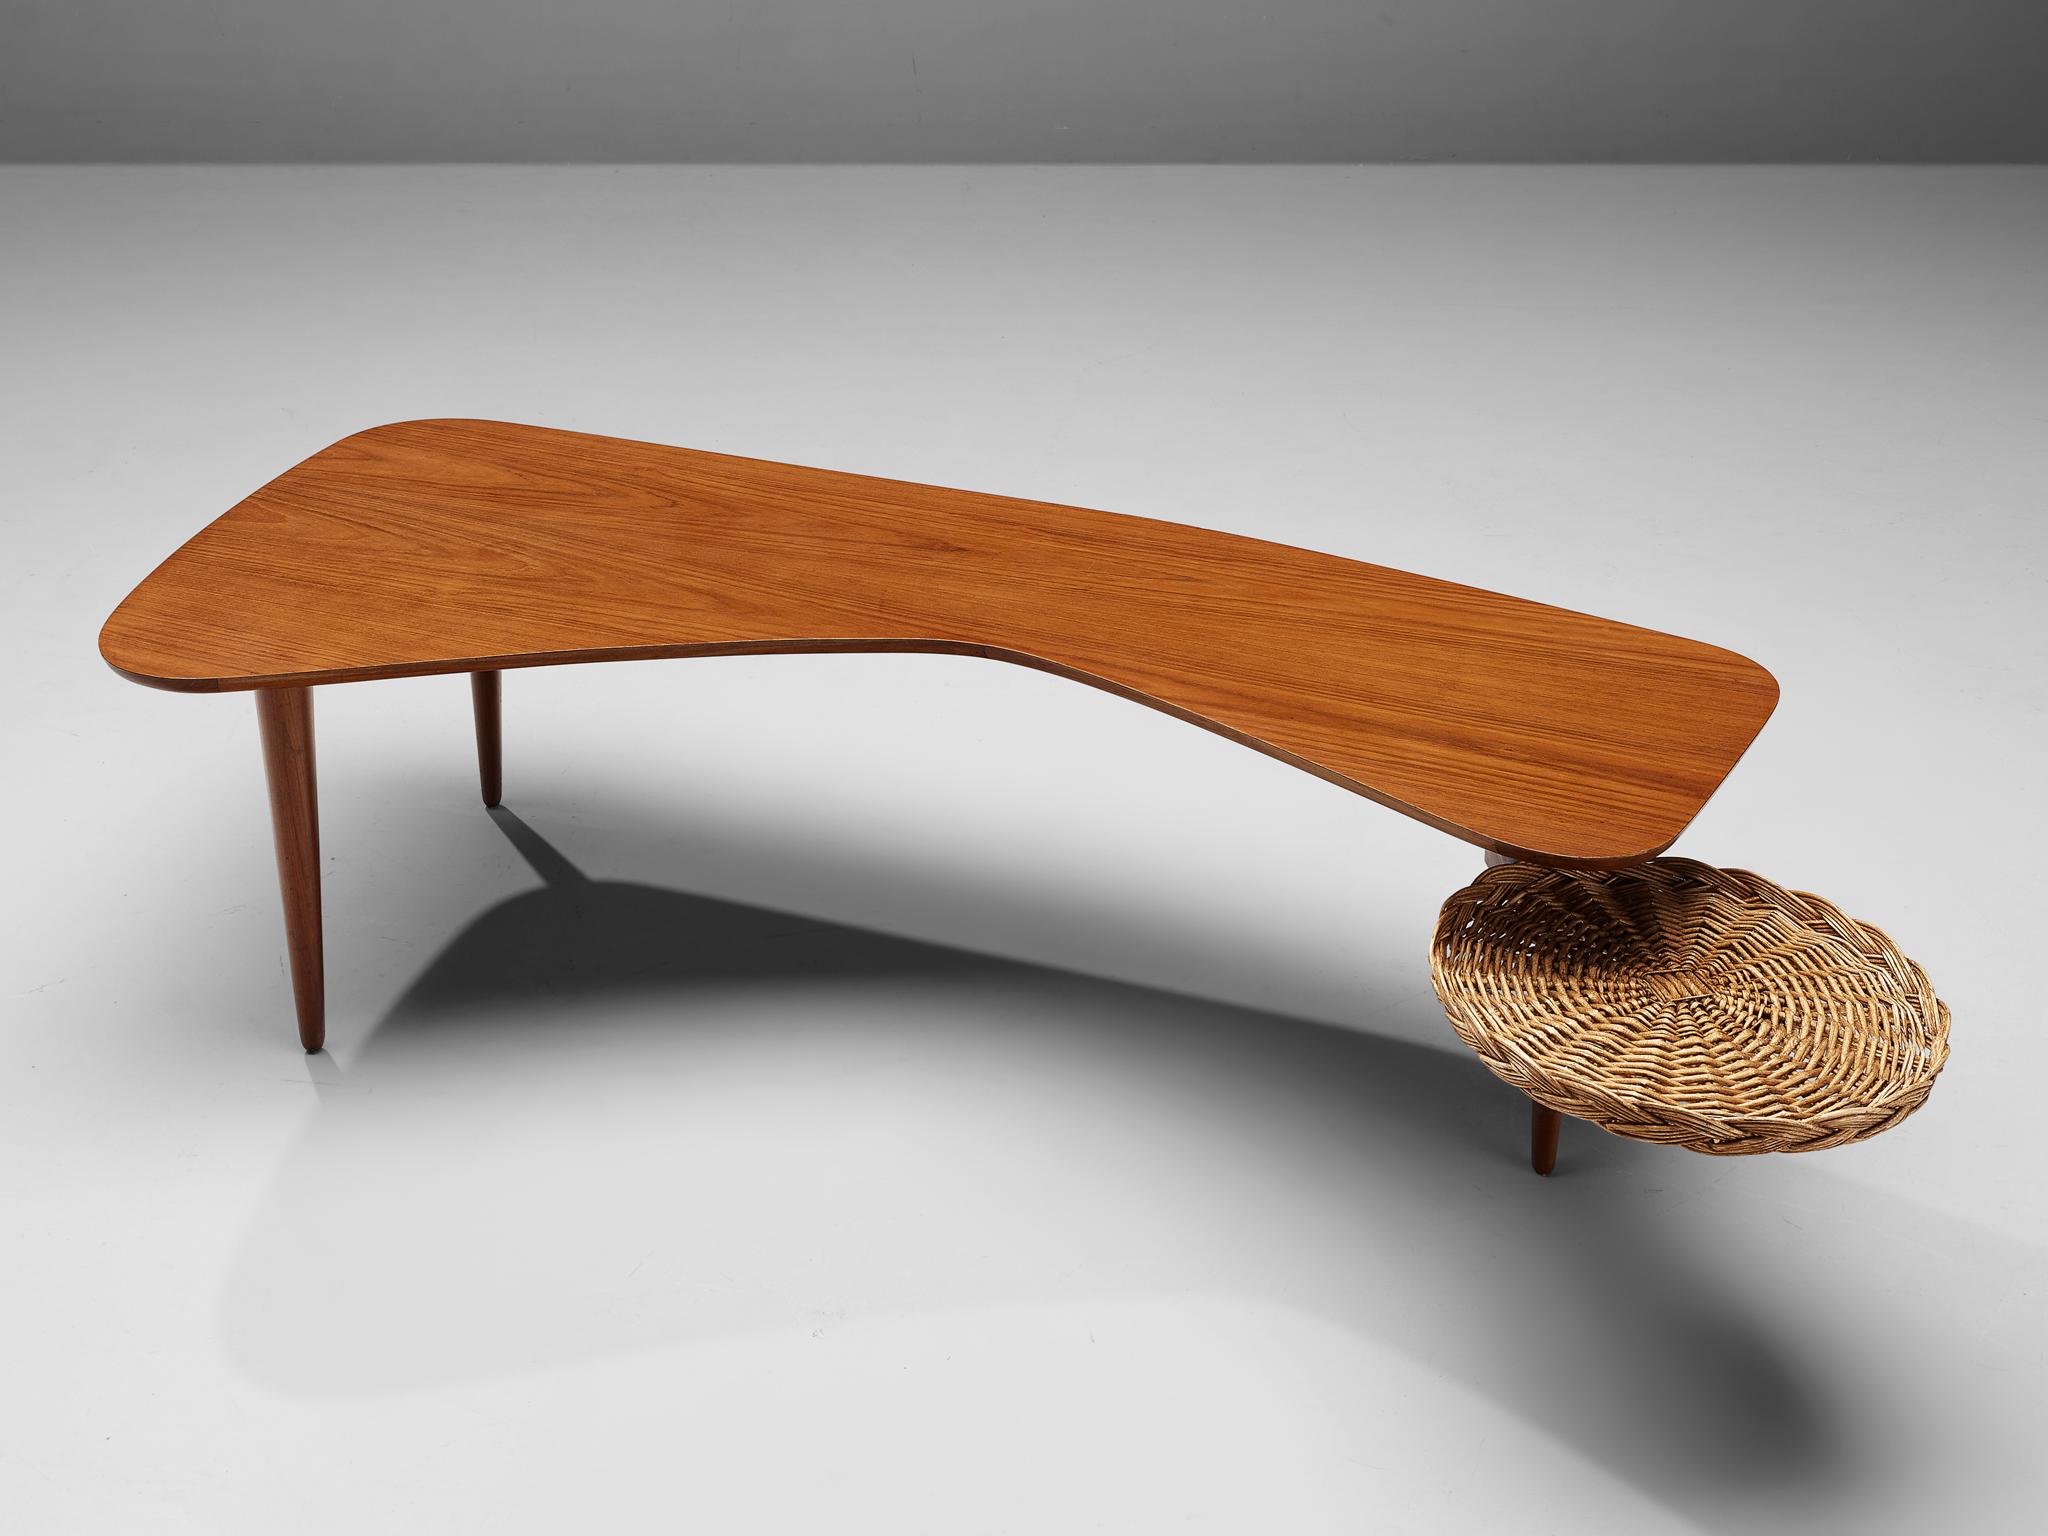 Taichiro Nakay (Nakai) for La Permanente Mobili Cantù, coffee table, teak veneer, reed, wood, Japan/Italy, 1950s

Taichiro Nakay is an incredibly talented Japanese designer who is mostly known for his participation at the Selettiva del Mobili